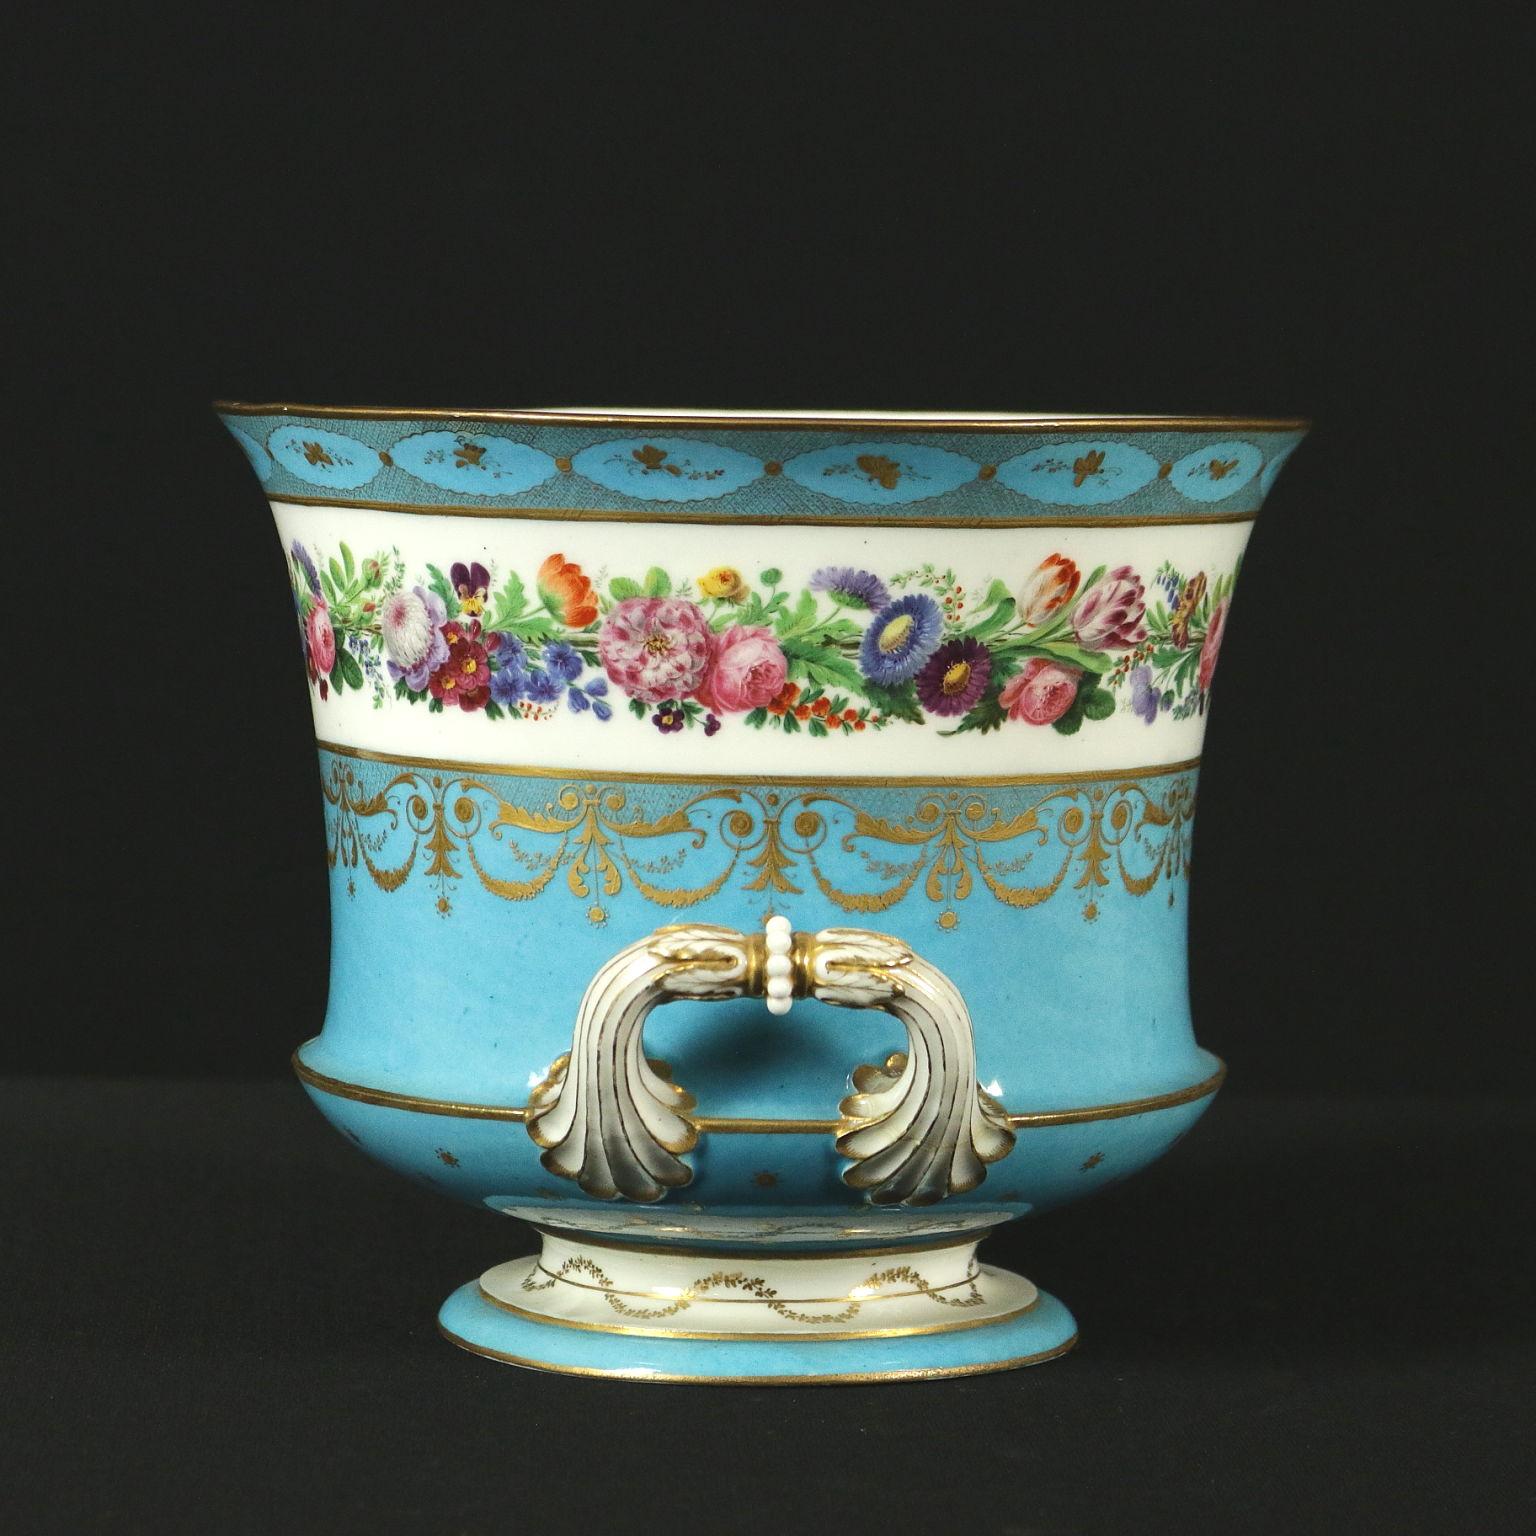 Porcelain vase with two handles, finely all-round decorated with plant and pure gold patterns. Manufacturing brand under the base.